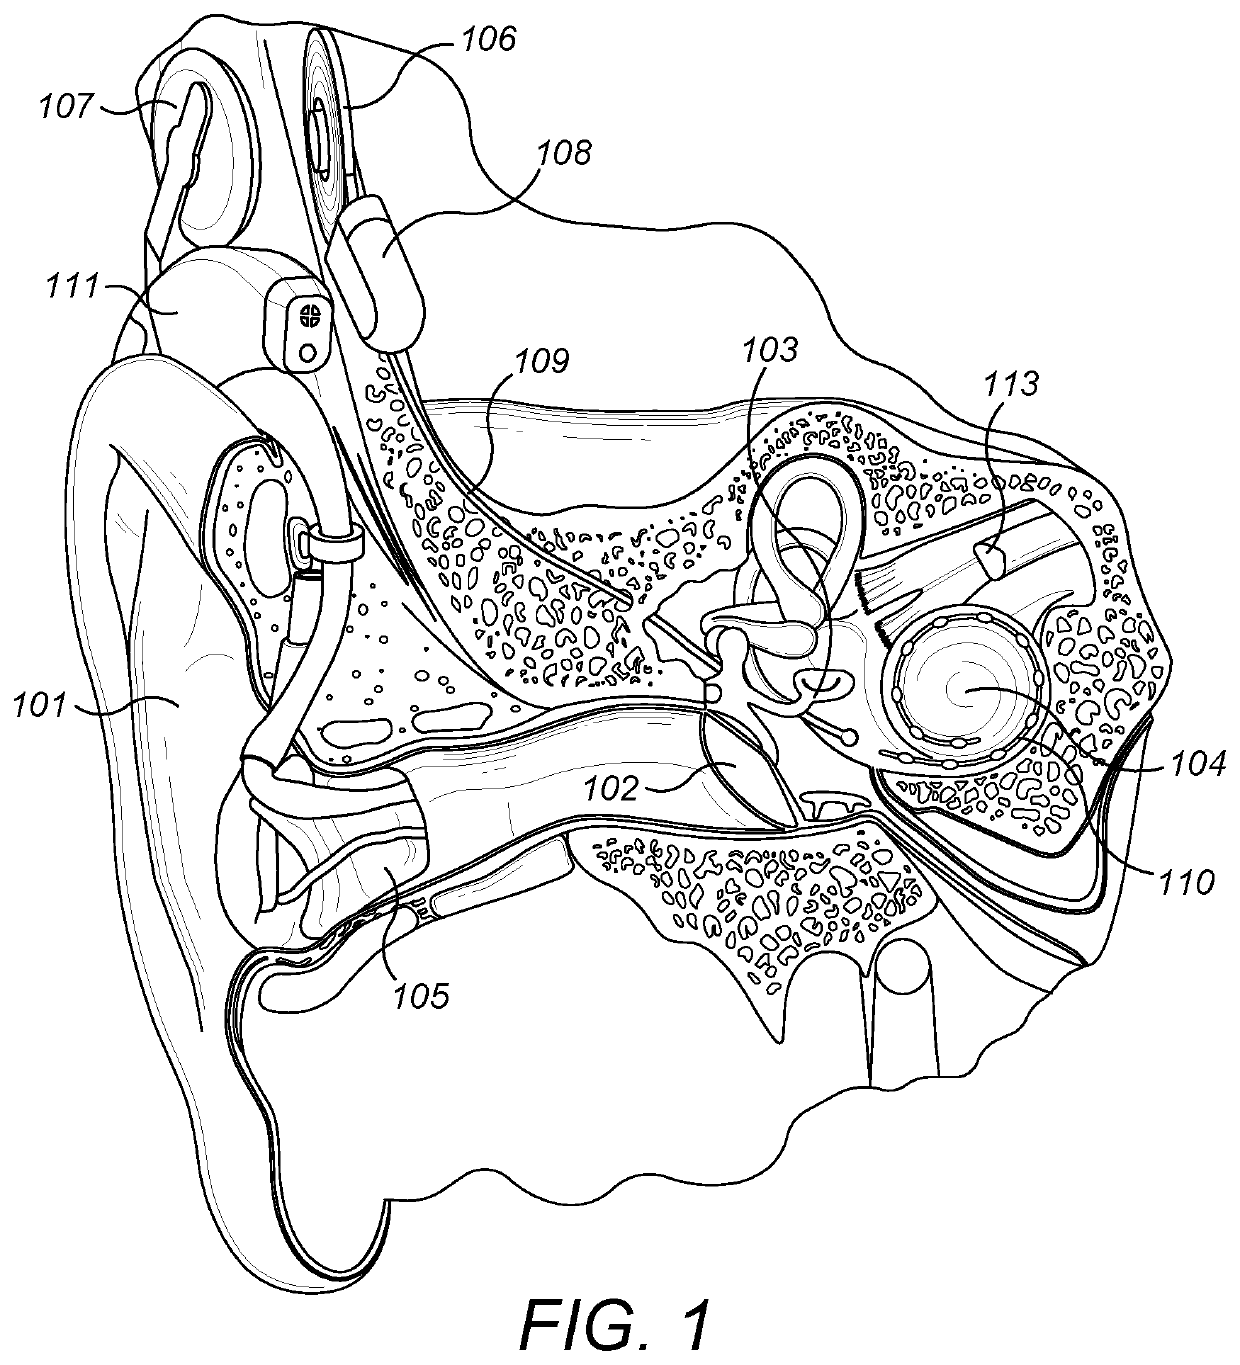 Middle Ear Implant Coupler for Mechanical Cochlea Stimulation via the Round Window